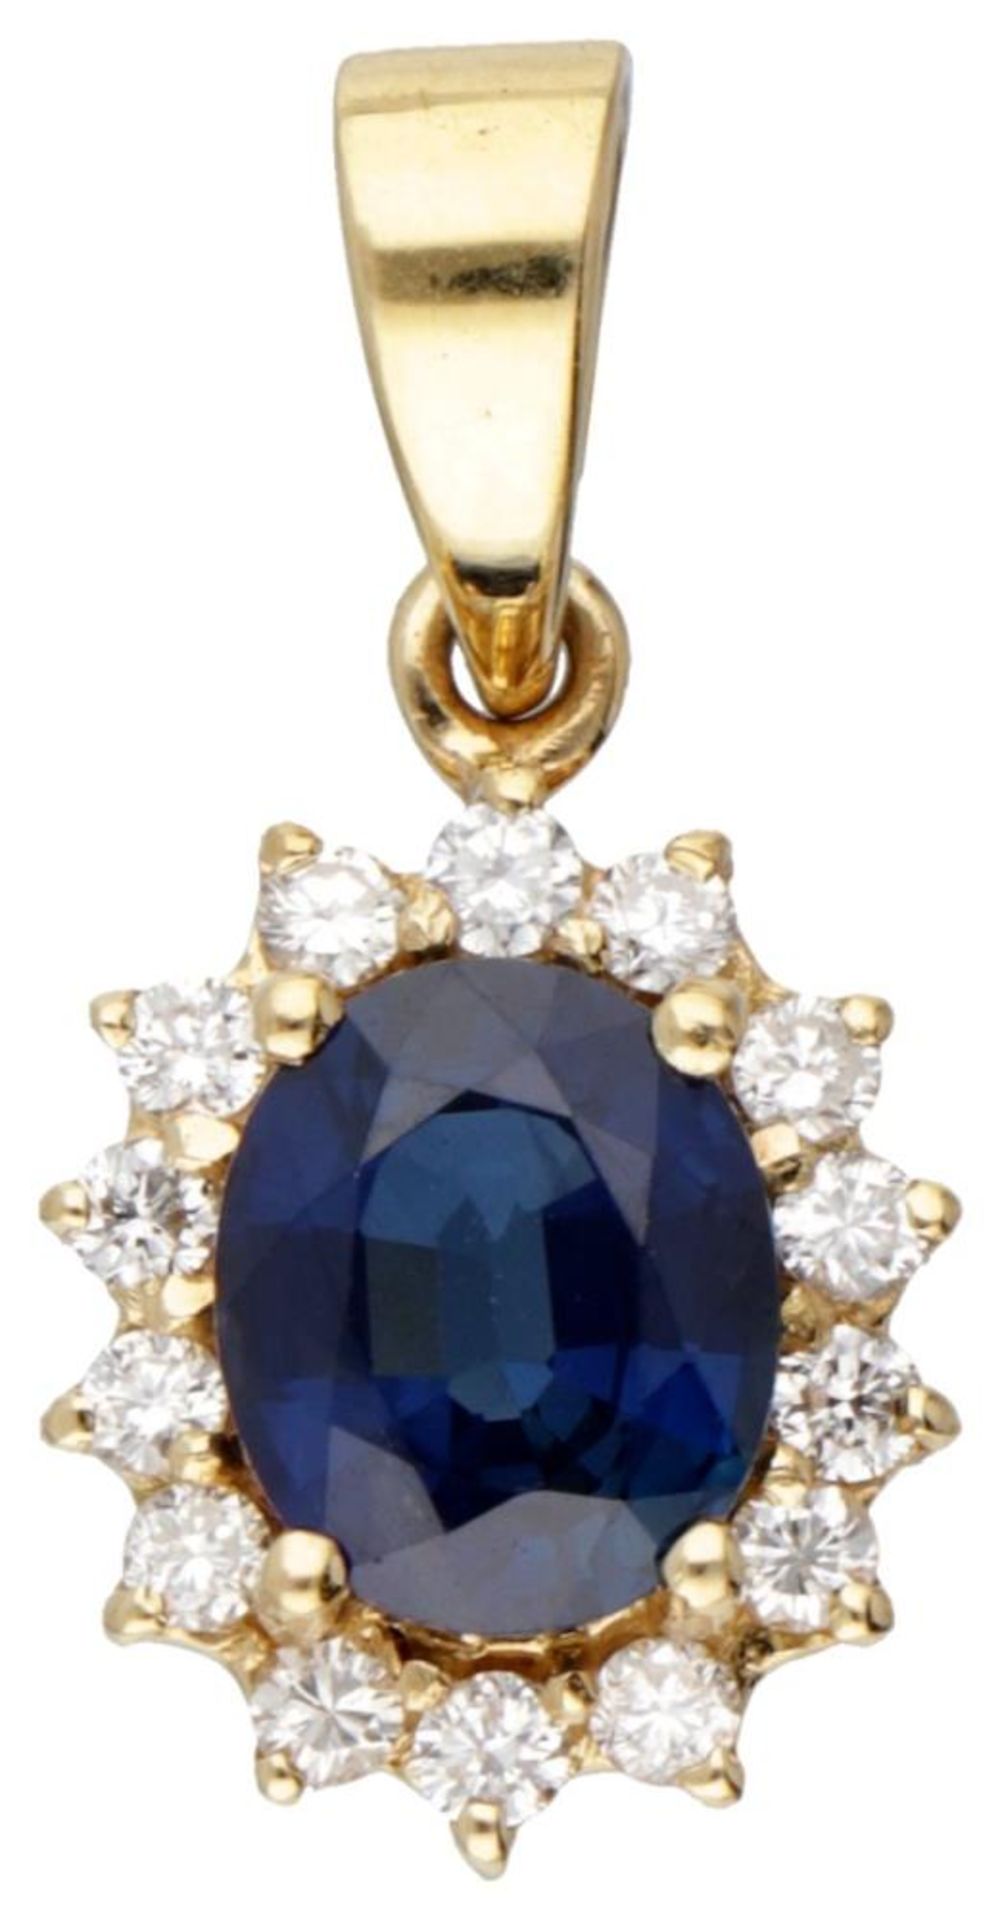 18K. Yellow gold cluster pendant set with approx. 1.26 ct. natural sapphire and approx. 0.14 ct. dia